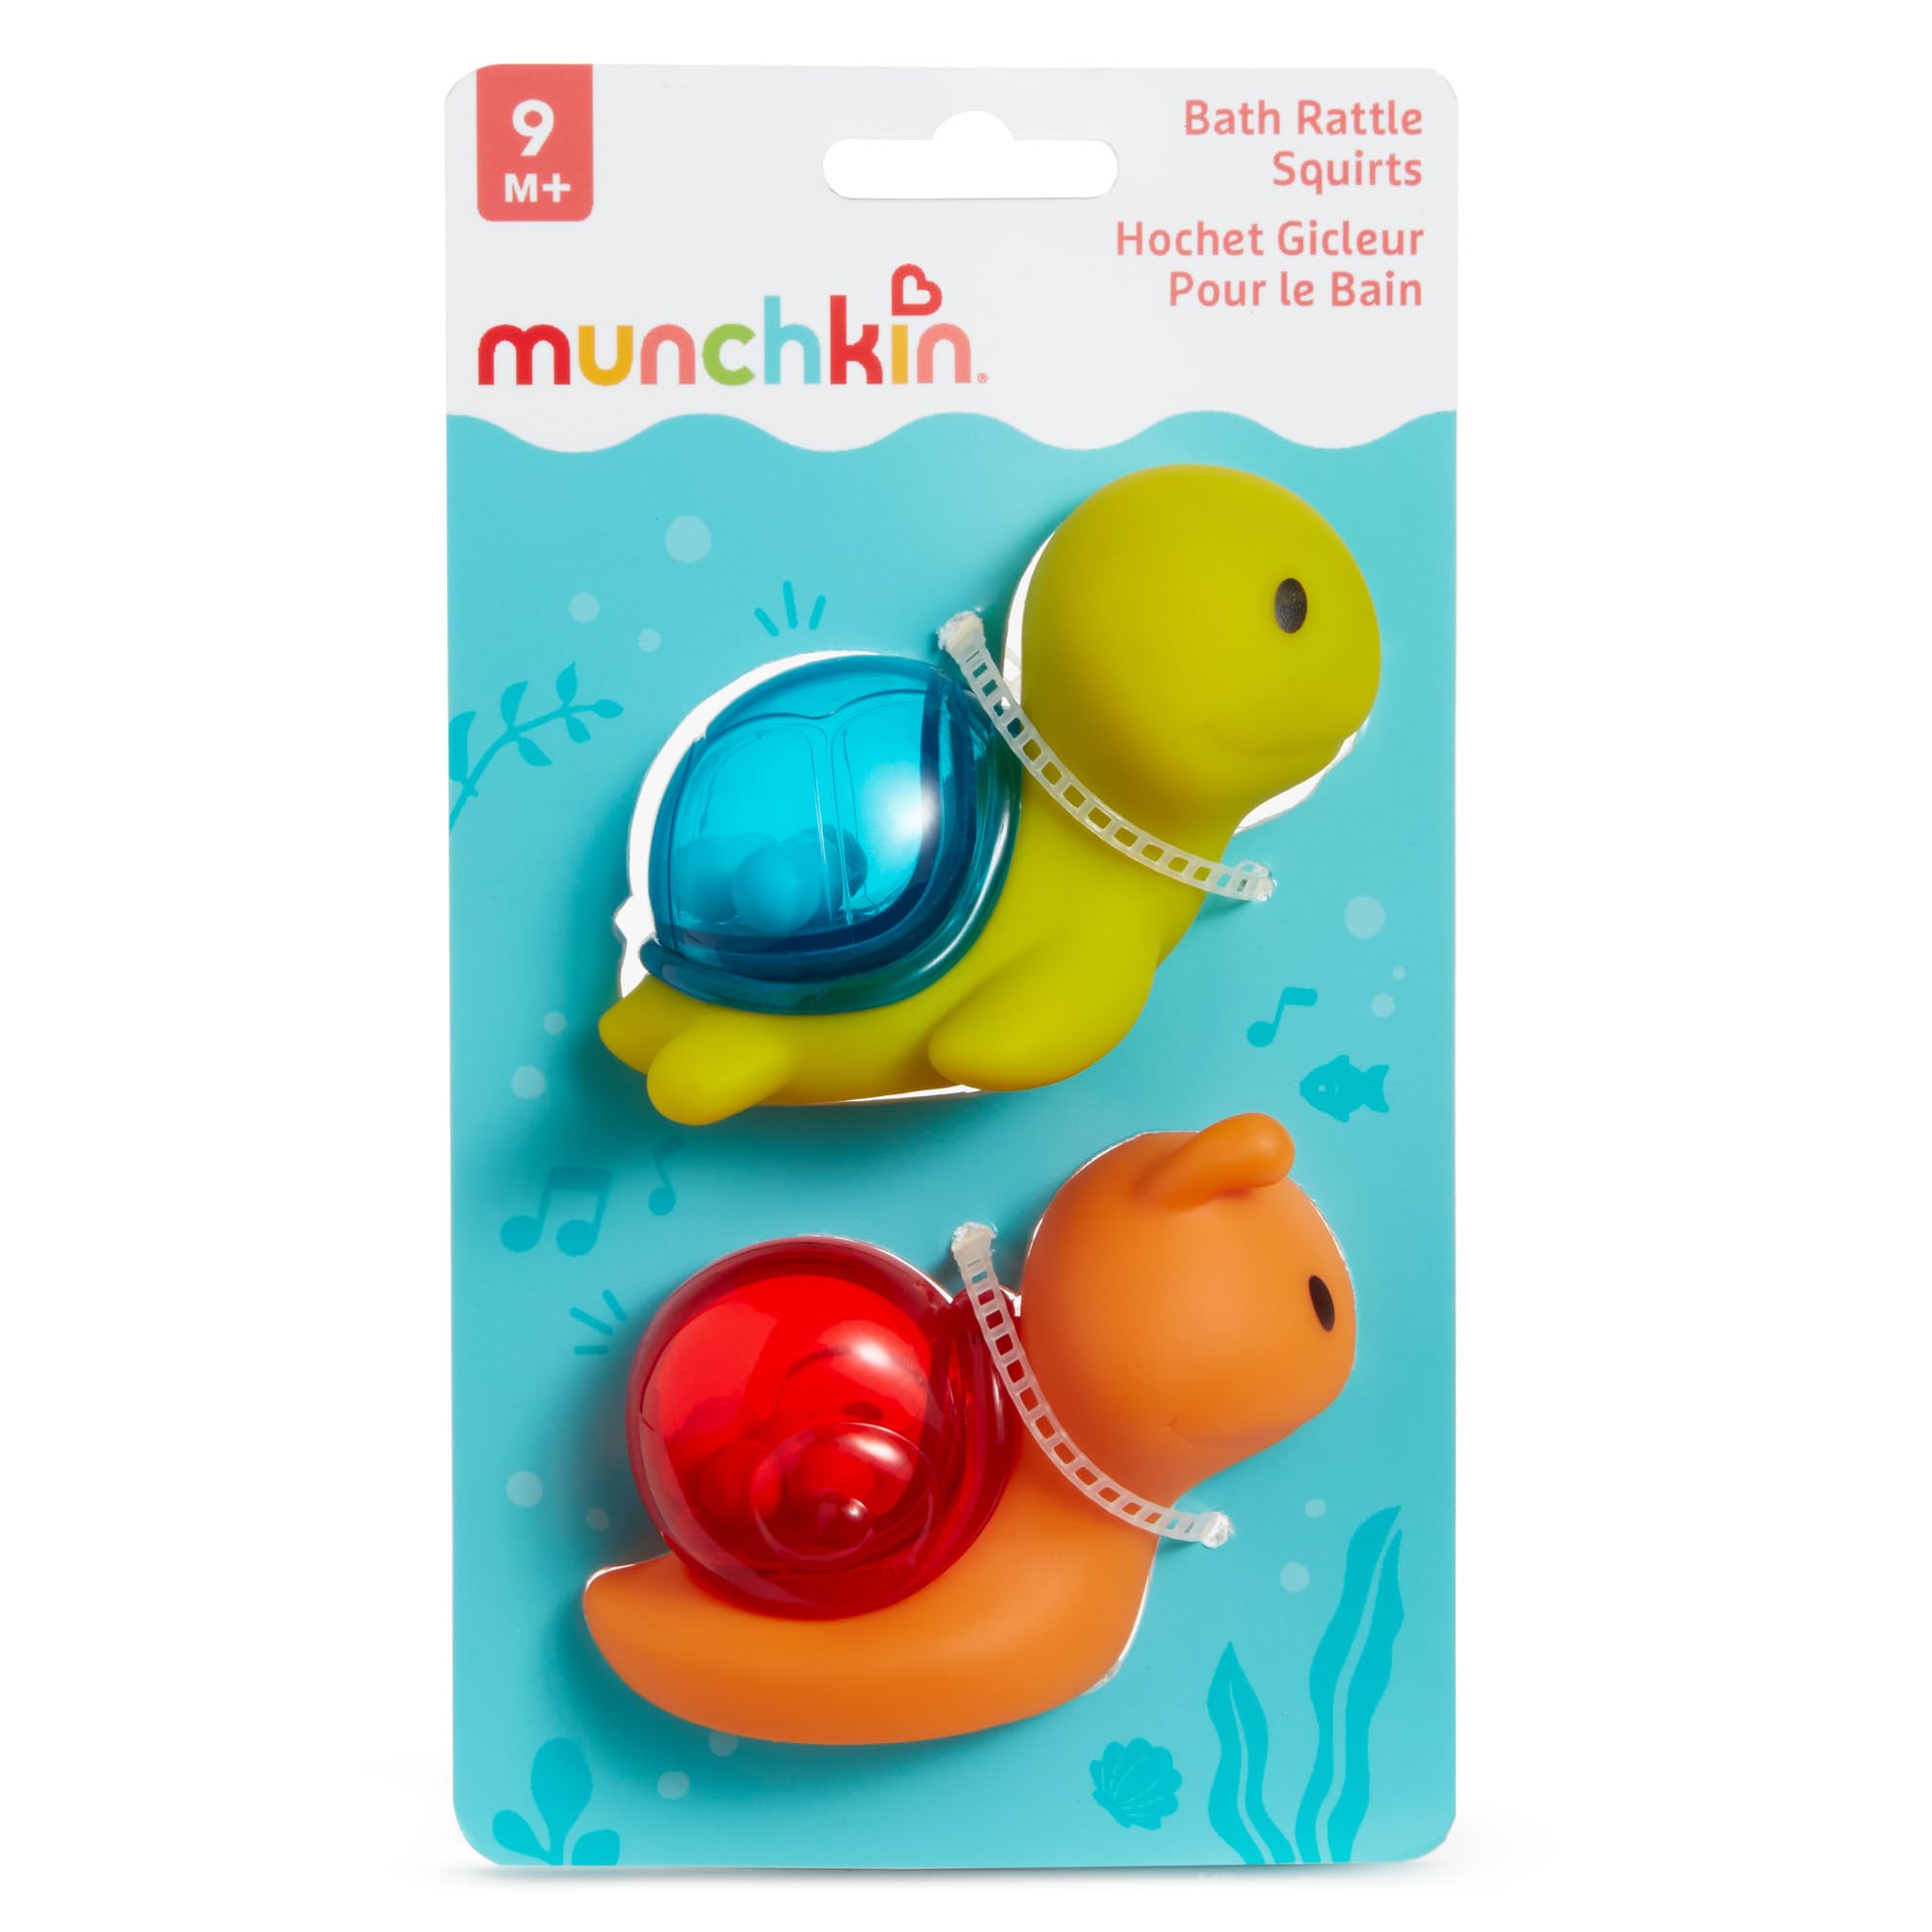 Munchkin® Bath Rattle Squirts - Fun Sensory Bath Learning Toys for Babies and Toddlers, Turtle and Snail, 2 Pack